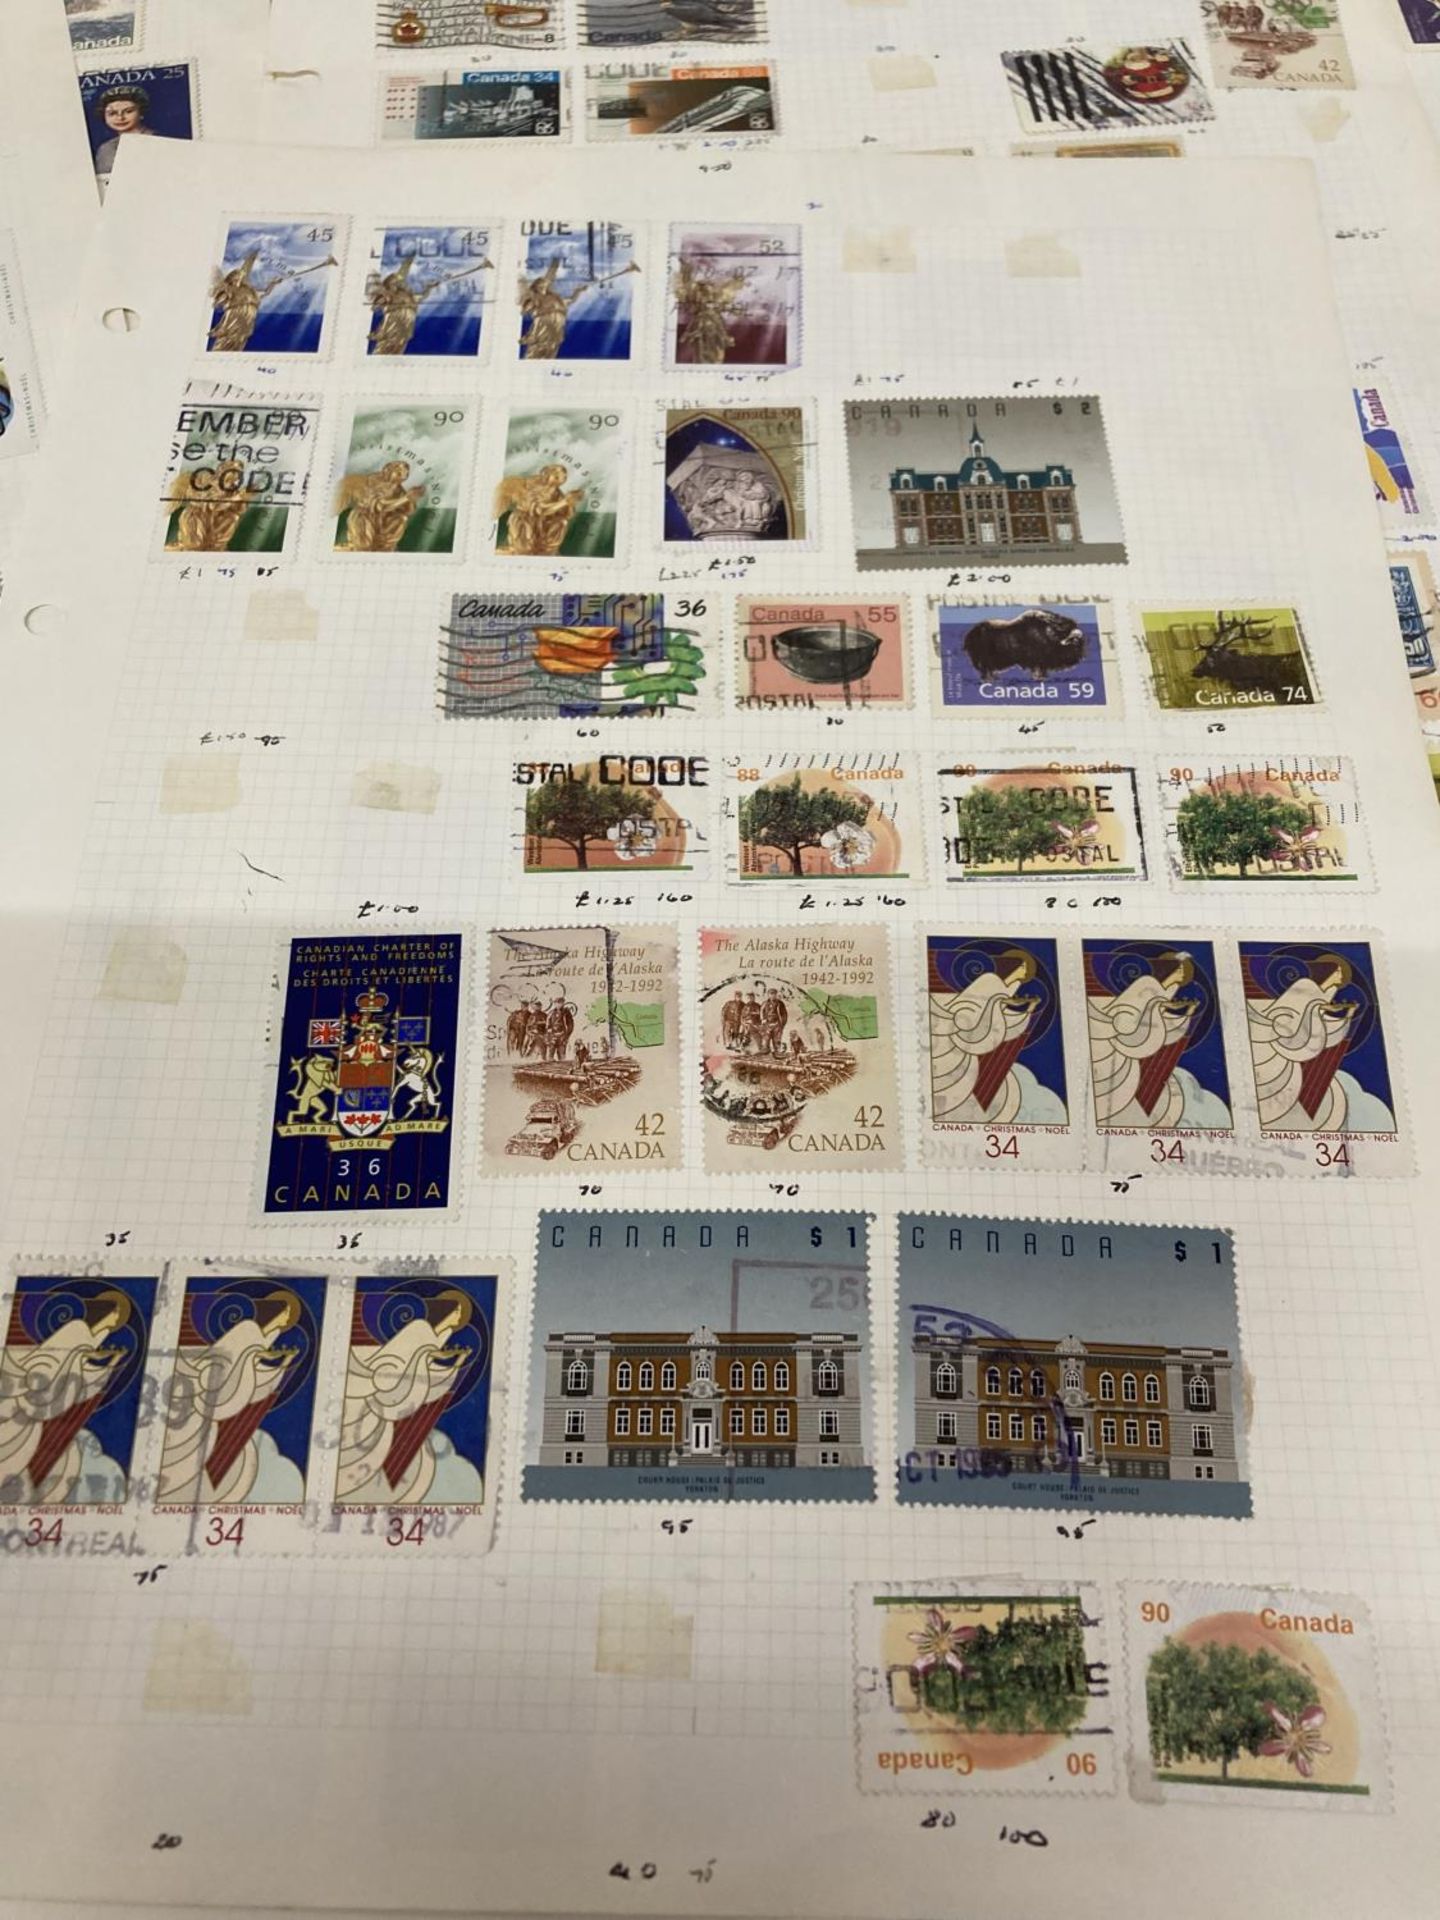 TEN PLUS SHEETS CONTAINING STAMPS FROM CANADA - Image 6 of 6